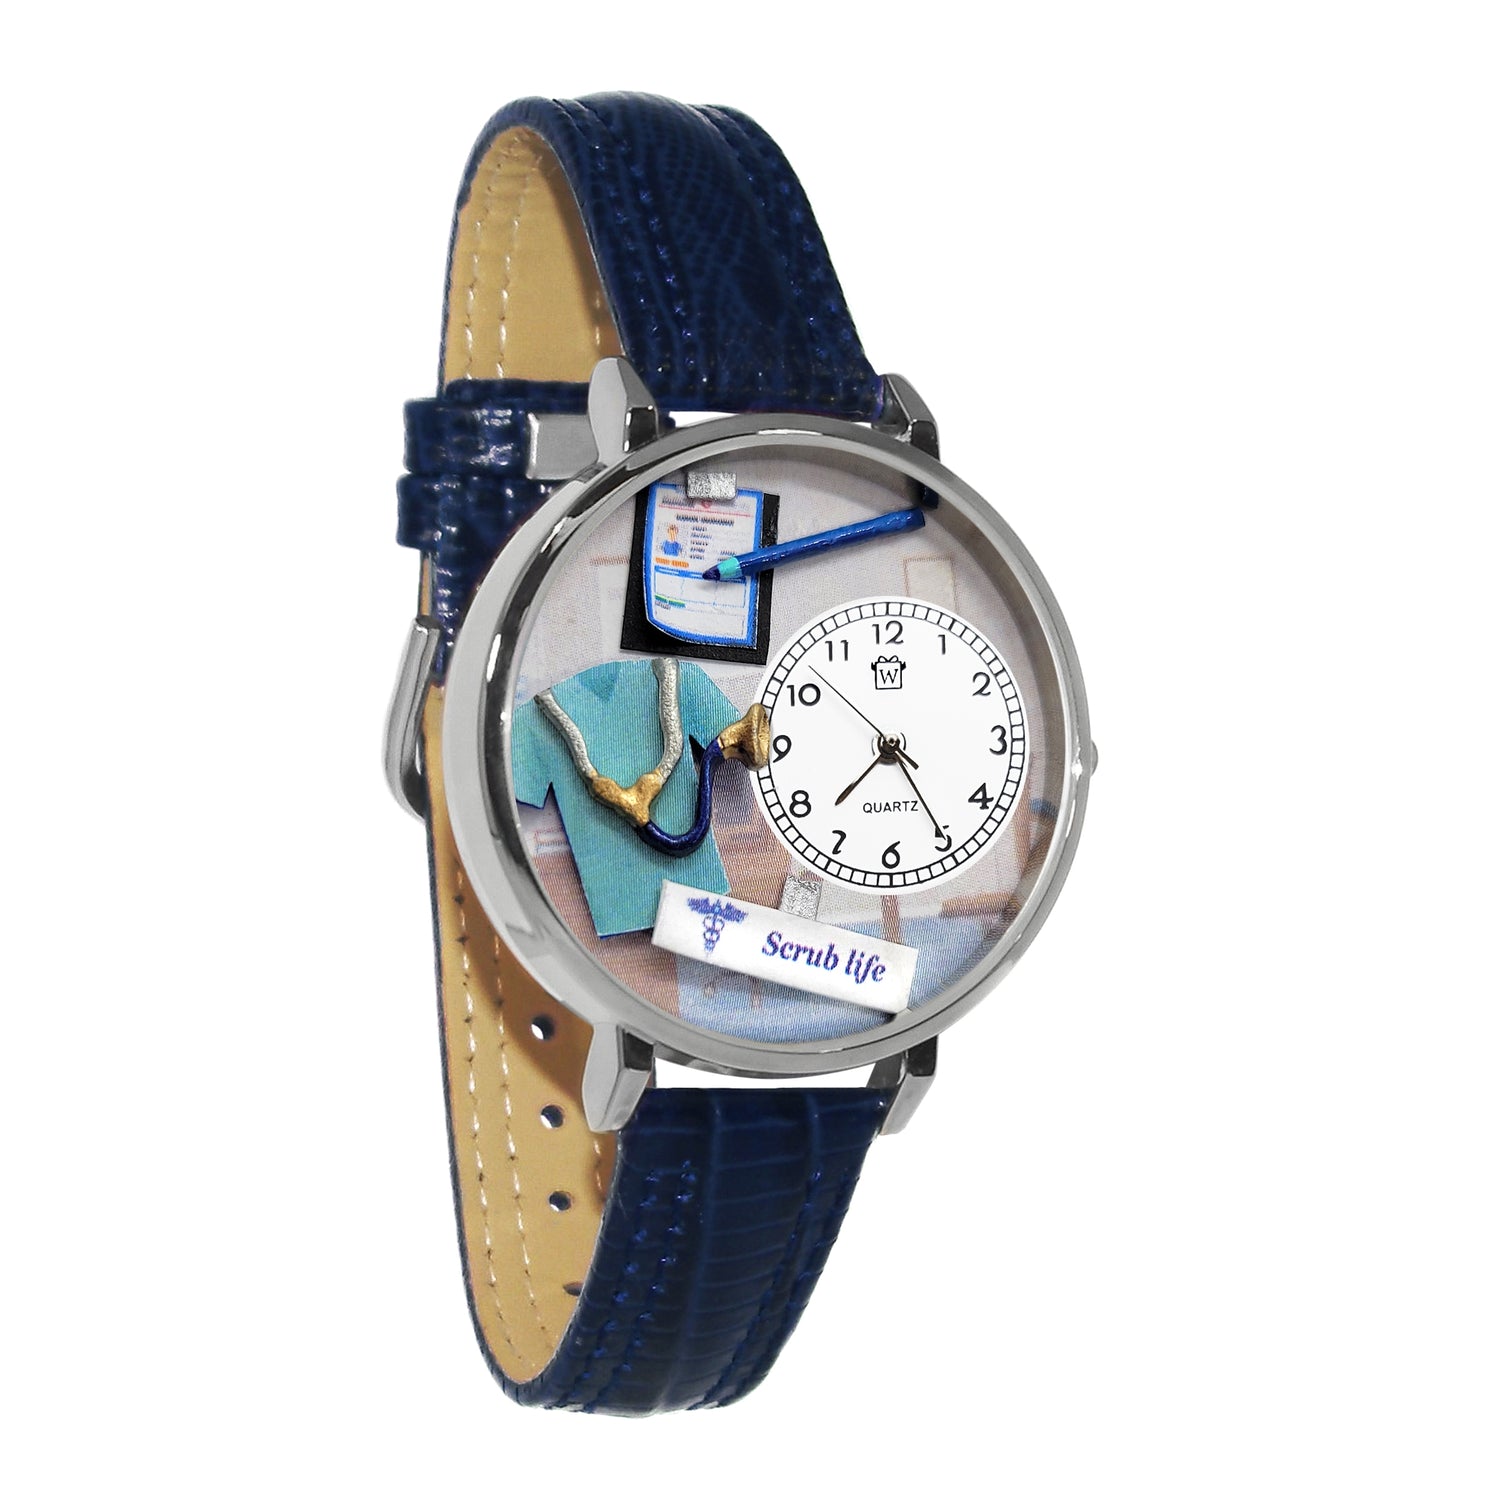 Whimsical Gifts | Scrub Life 3D Watch Large Style | Handmade in USA | Professions Themed | Medical Professions | Novelty Unique Fun Miniatures Gift | Gold Finish Navy Blue Leather Watch Band